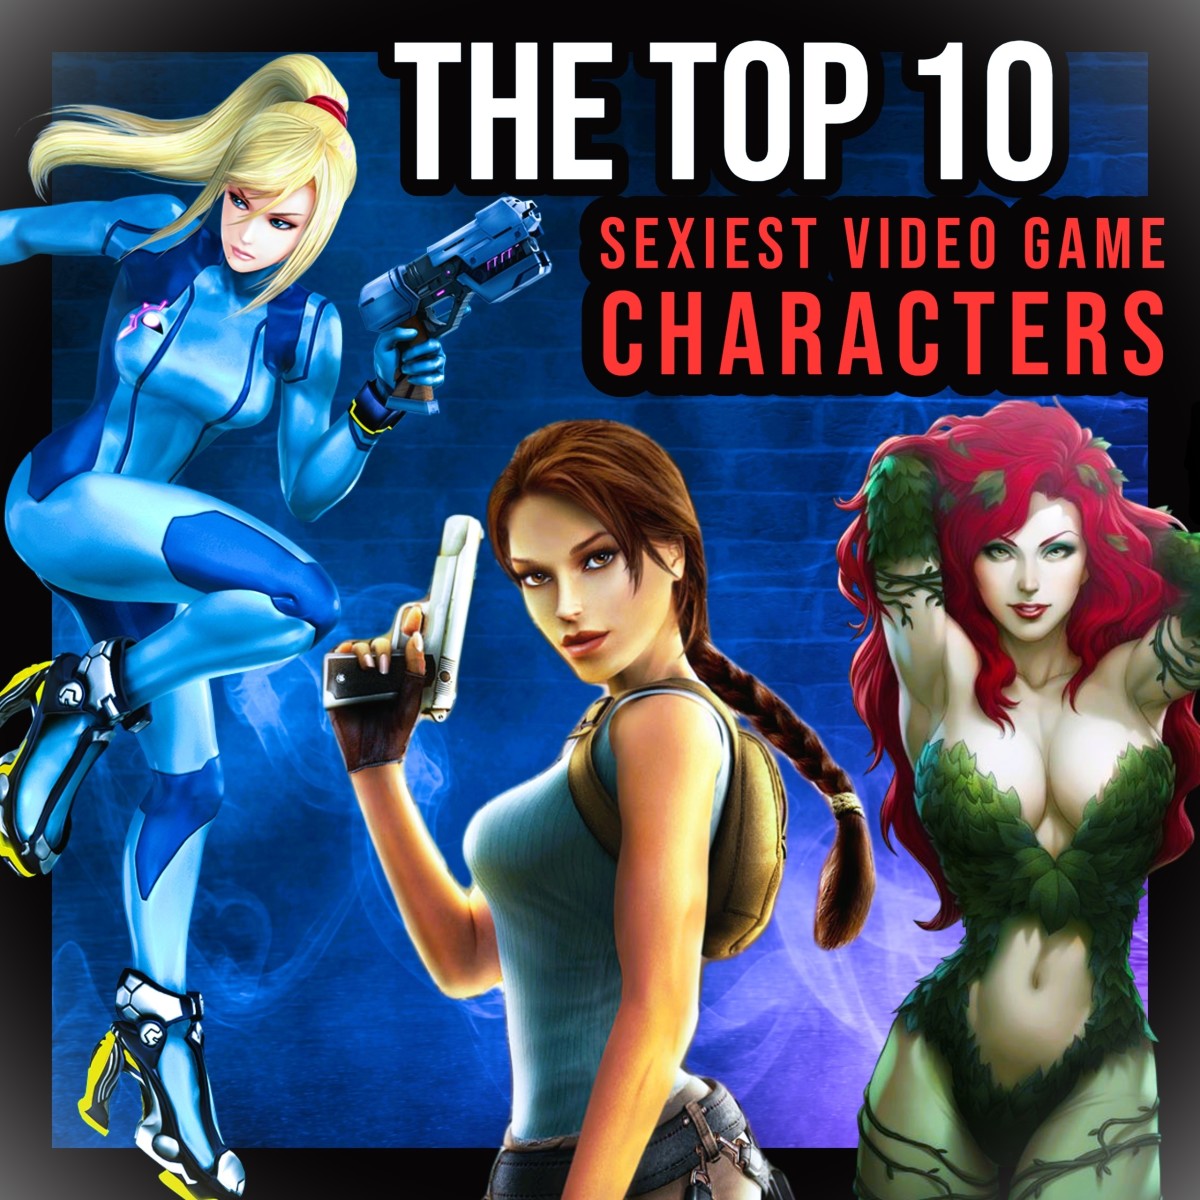 From Chun-Li to Lara Croft, this article ranks the 10 sexiest video characters of all time. Did your favorite character make the final 10 in our list? Read on to find out!